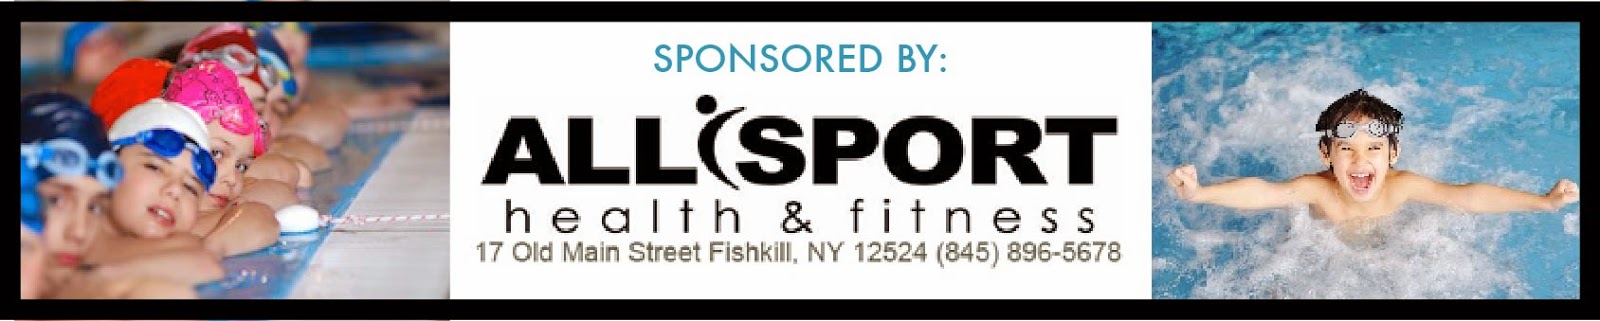 Sponsored by All Sport Health & Fitness